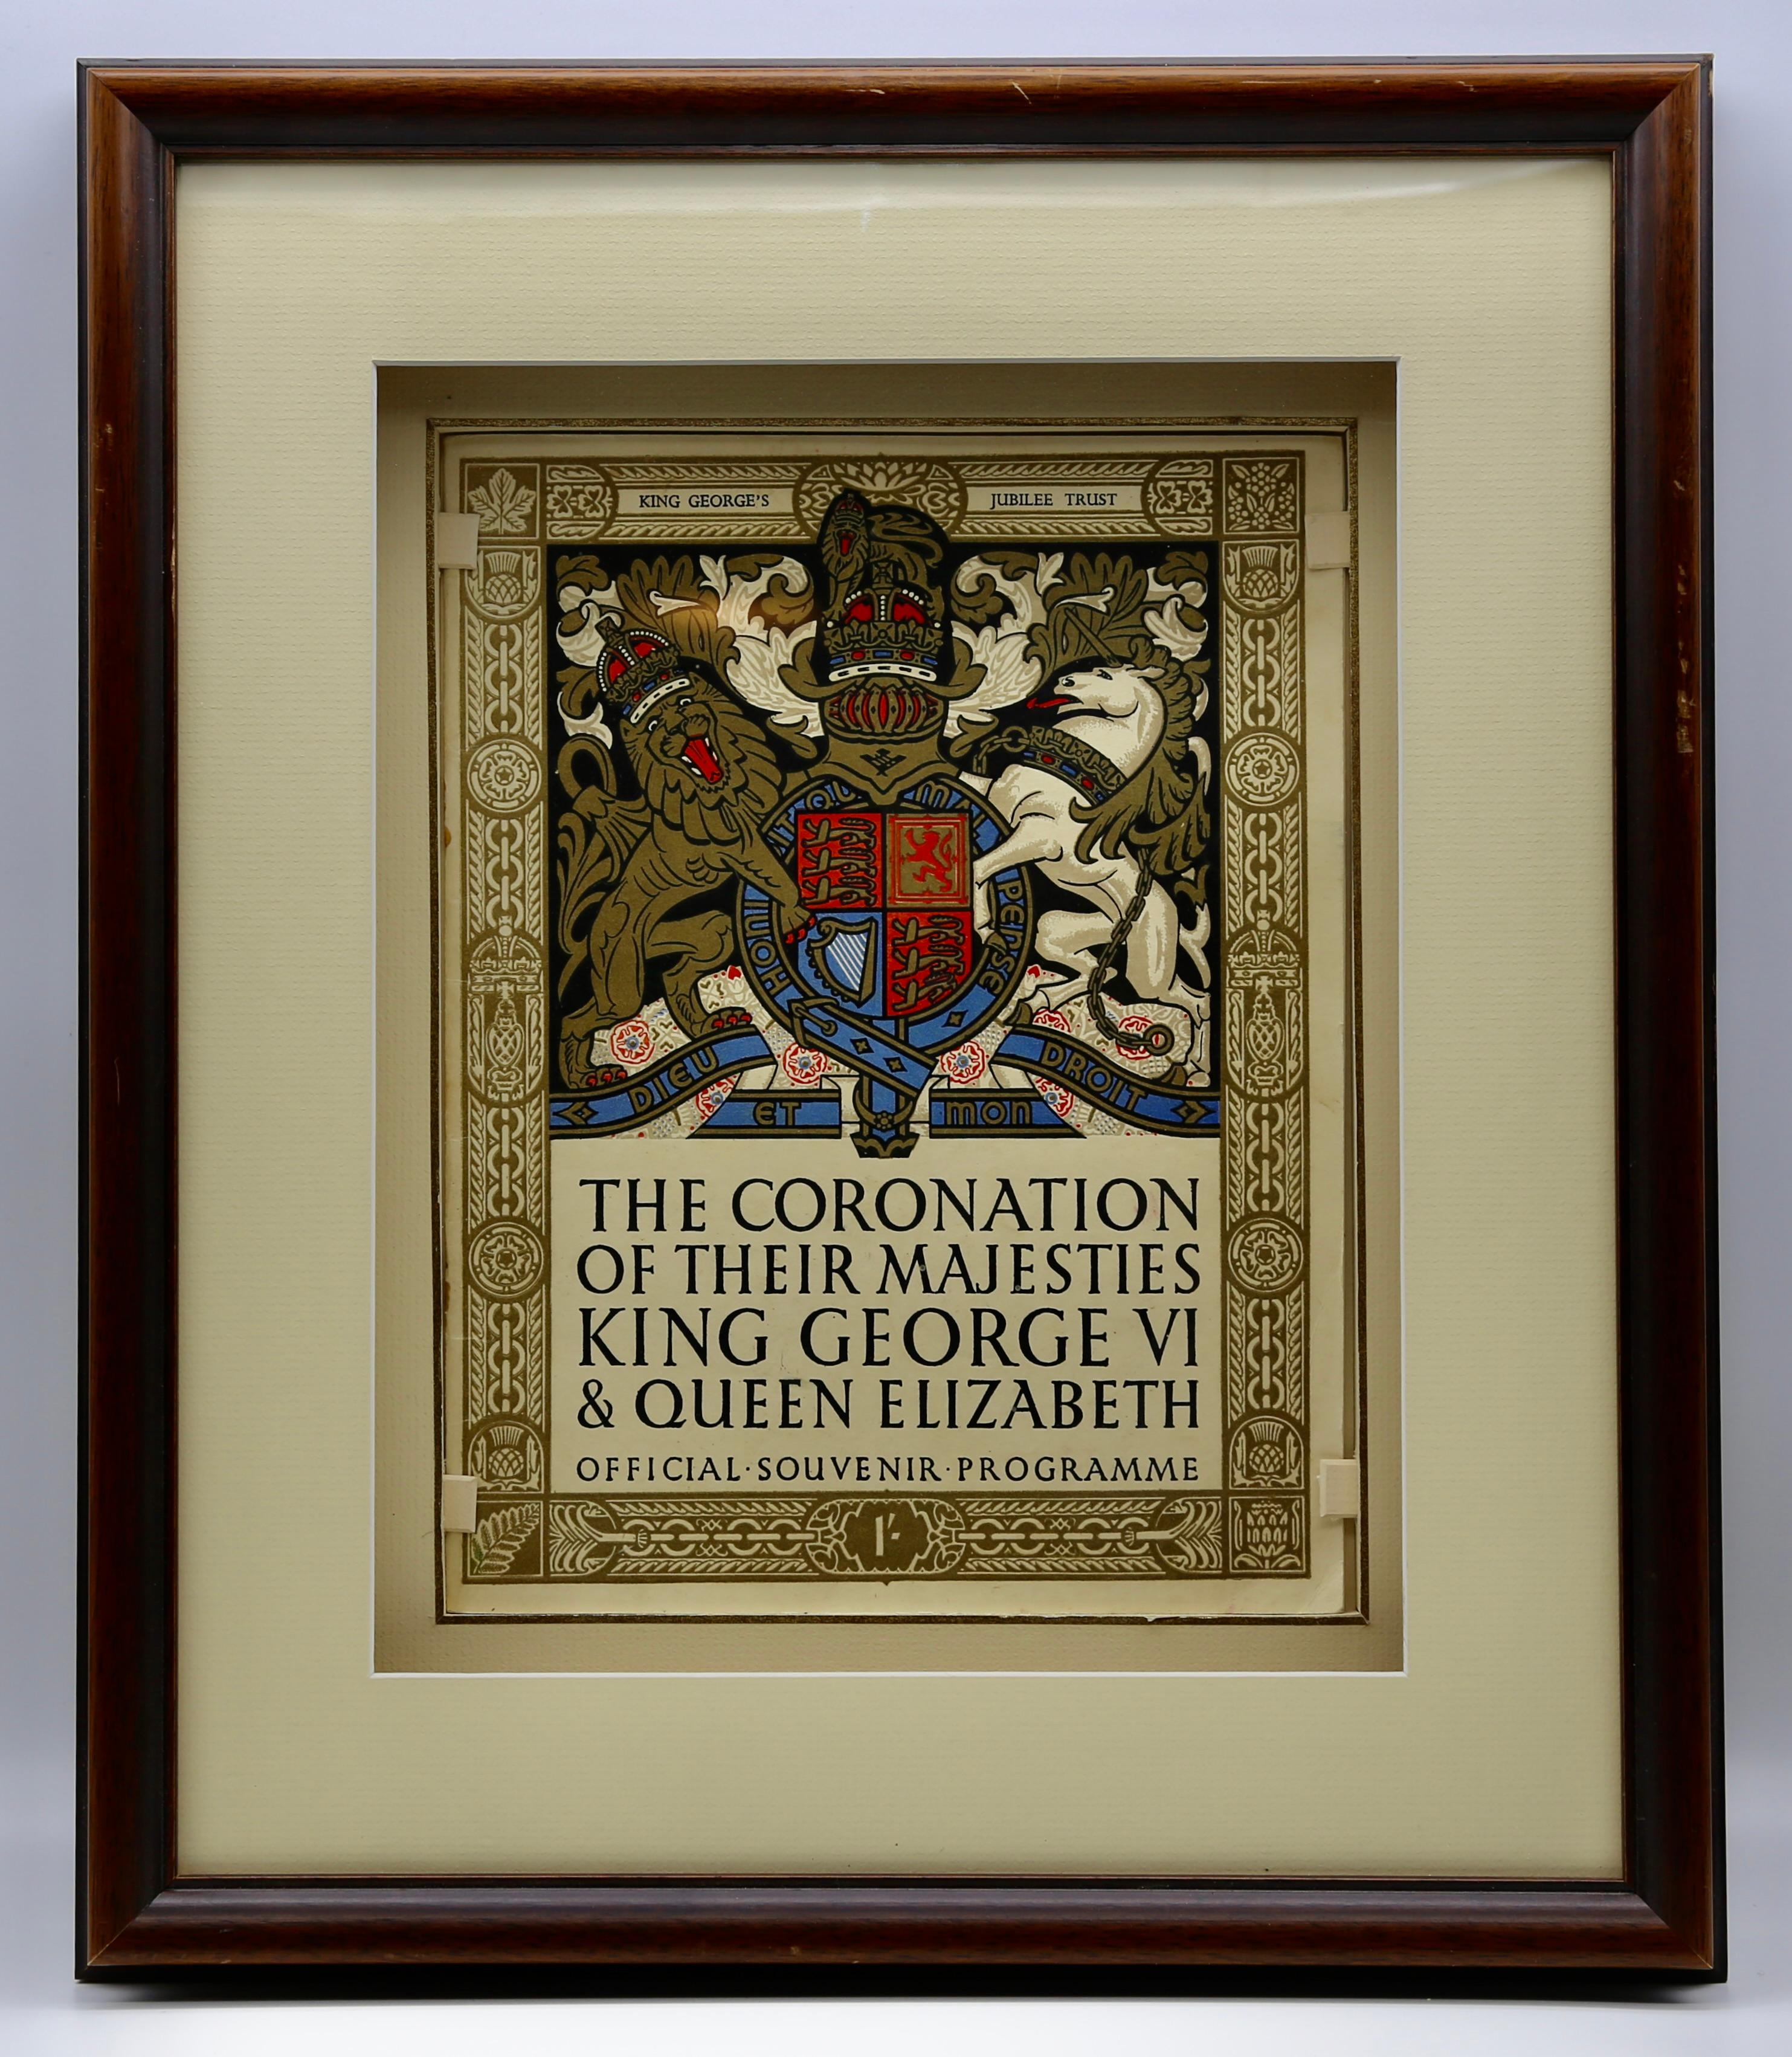 Official Vintage 1937 program of the Coronation of King George and Queen Elizabeth. Framed in a dark brown wood shadowbox with an off-white colored mat. Back of the frame has three hinges to access the program. Program is complete and is excellent